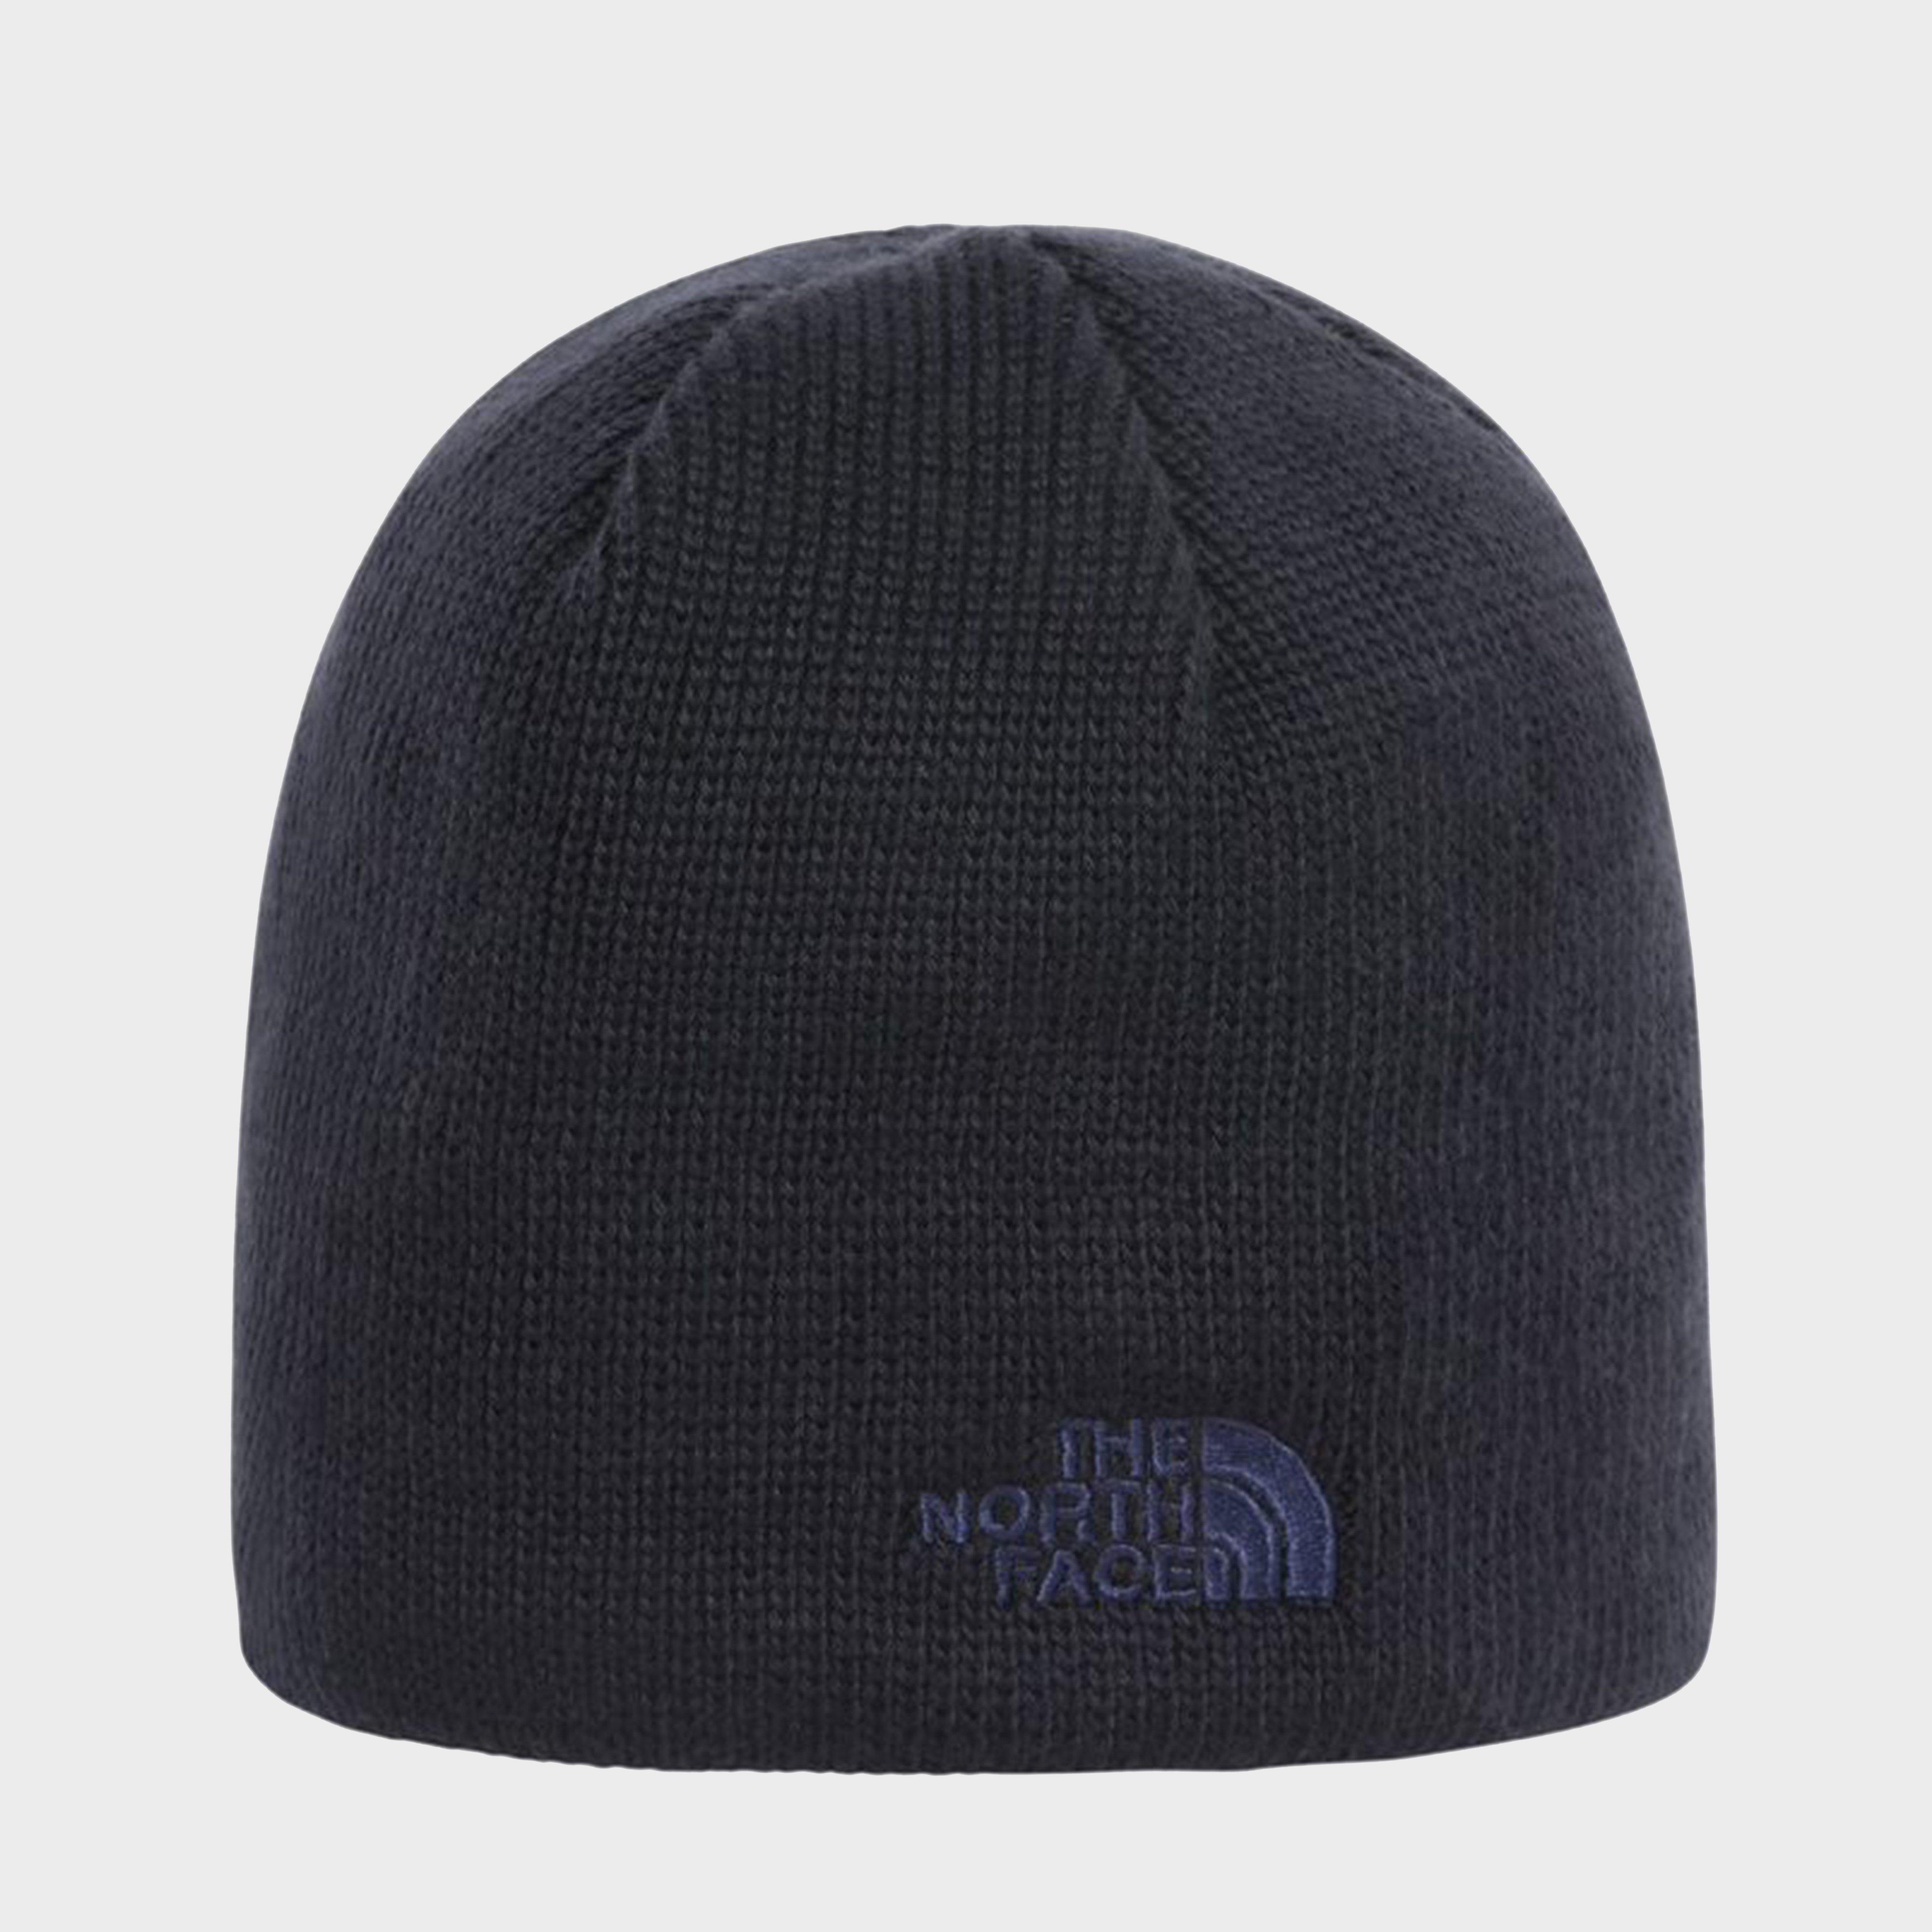 north face wooly hats